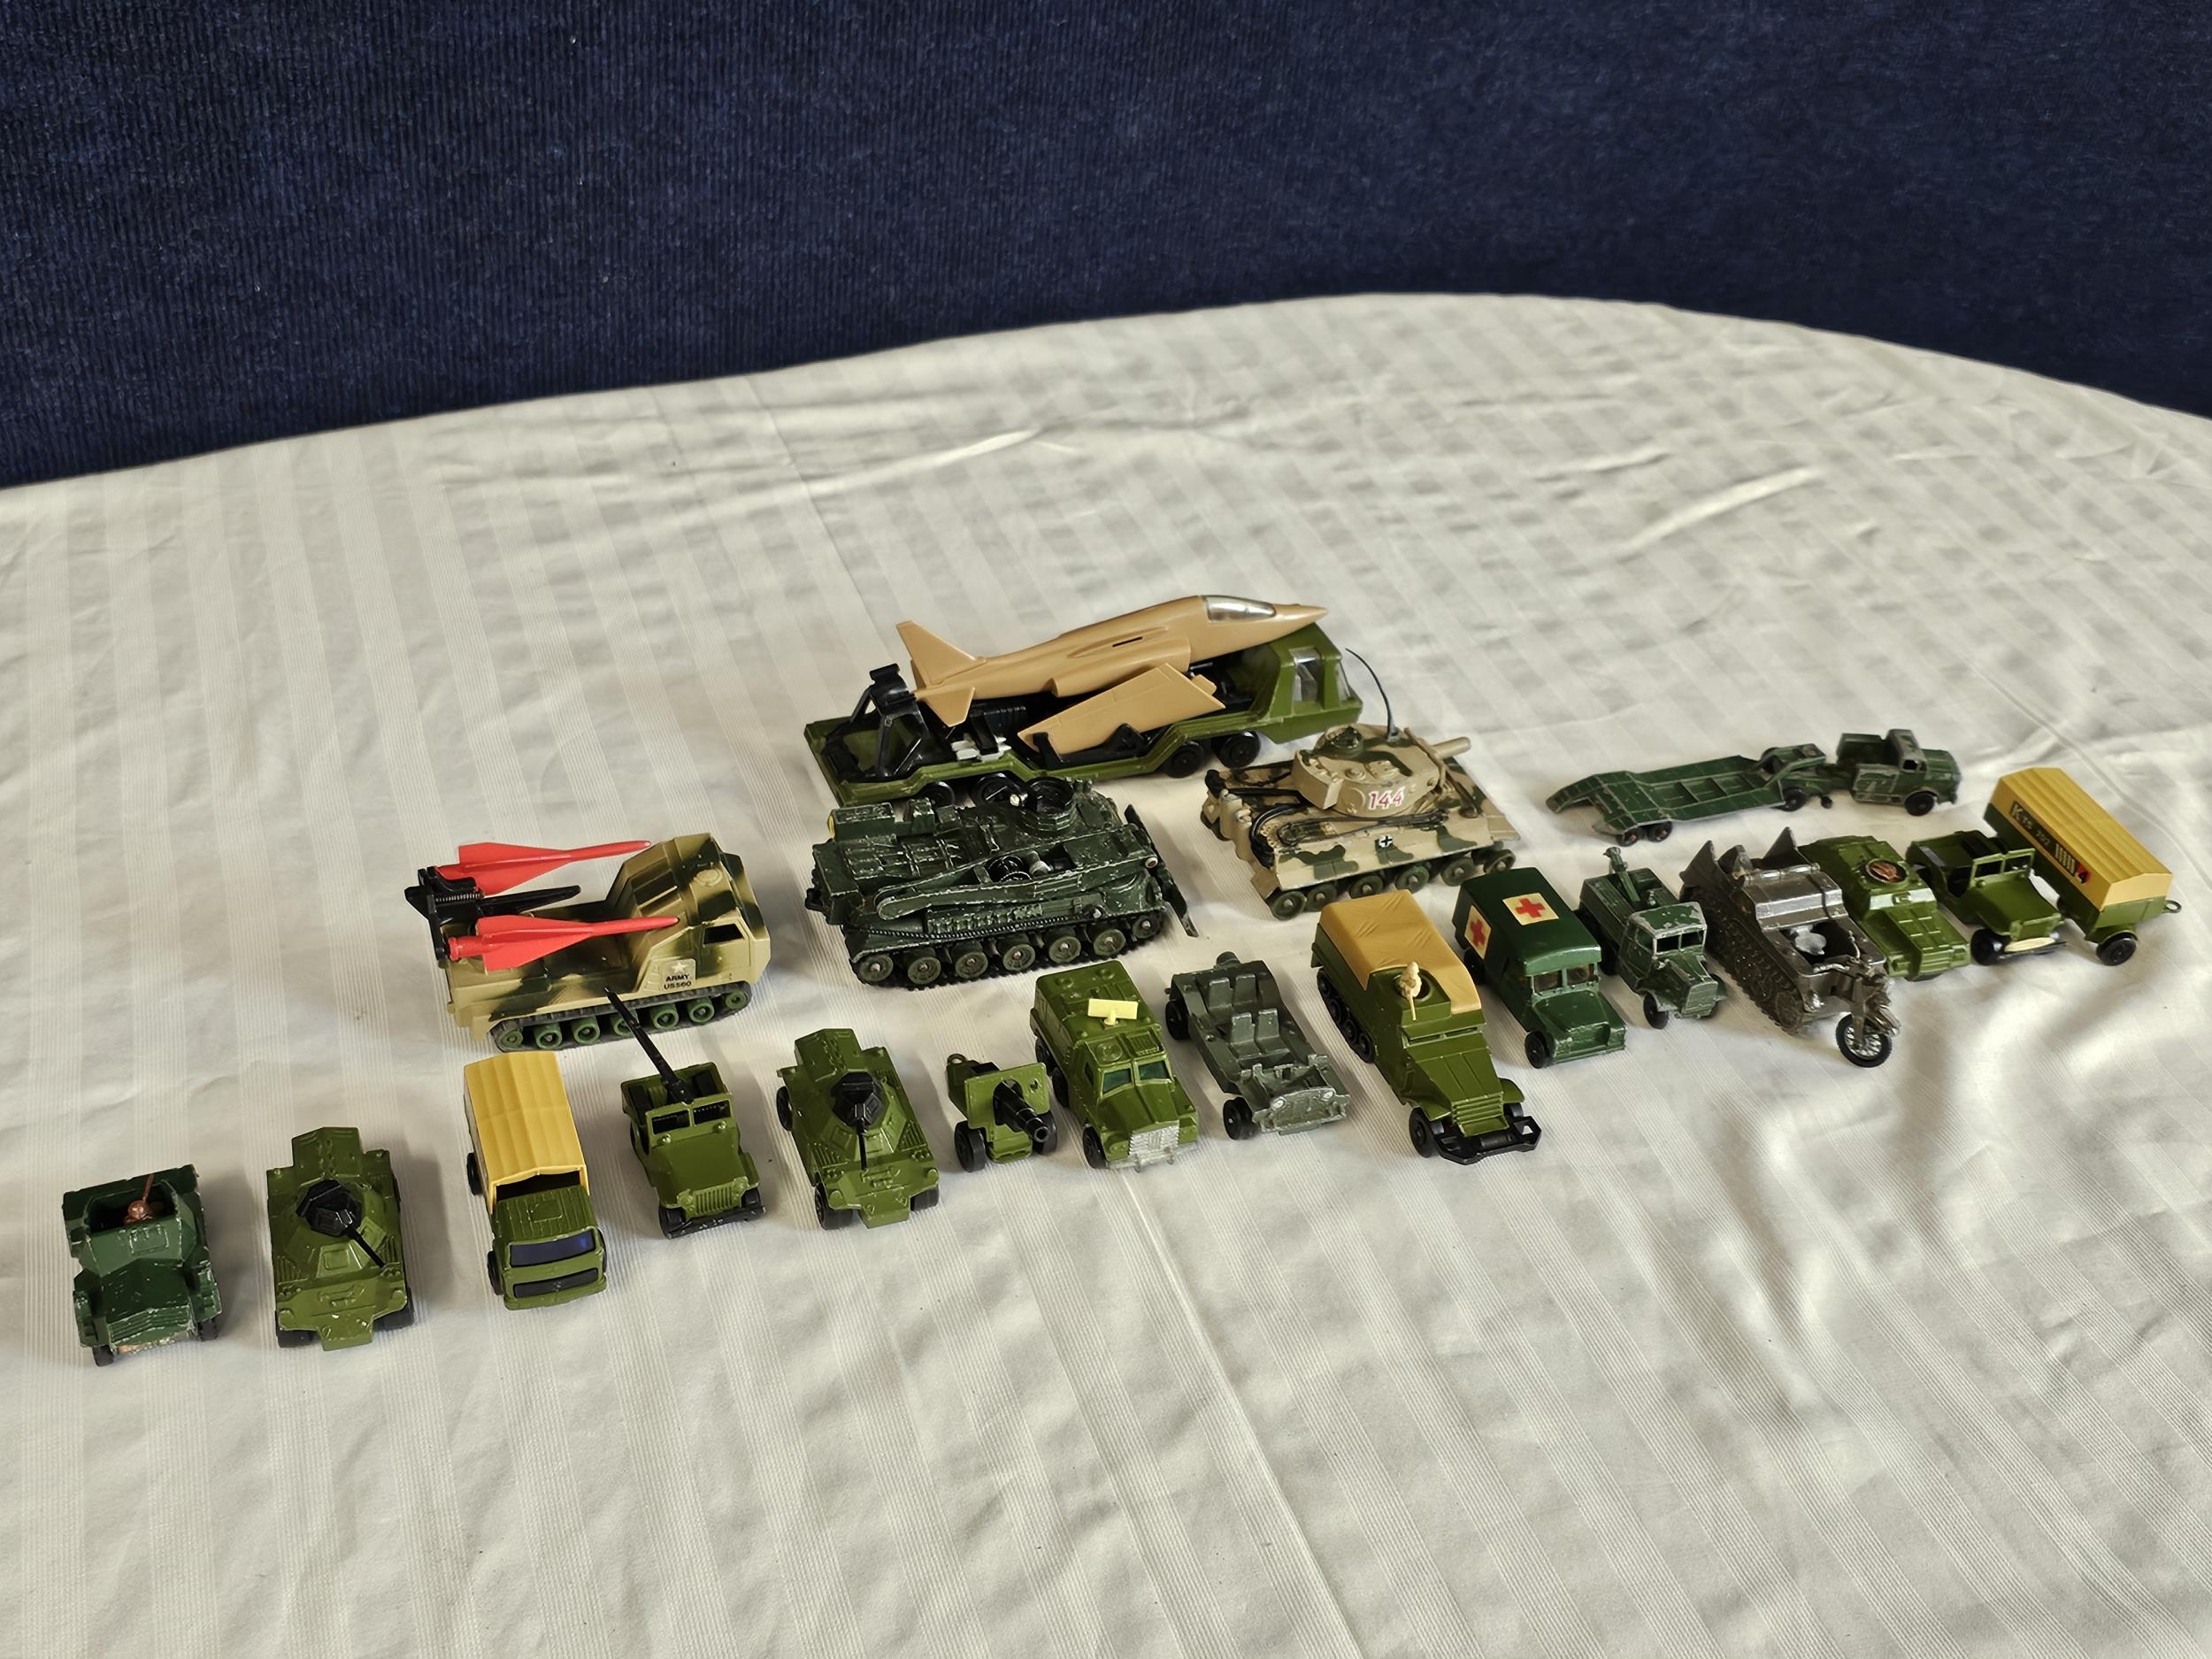 A good collection of die-cast military vehicles.